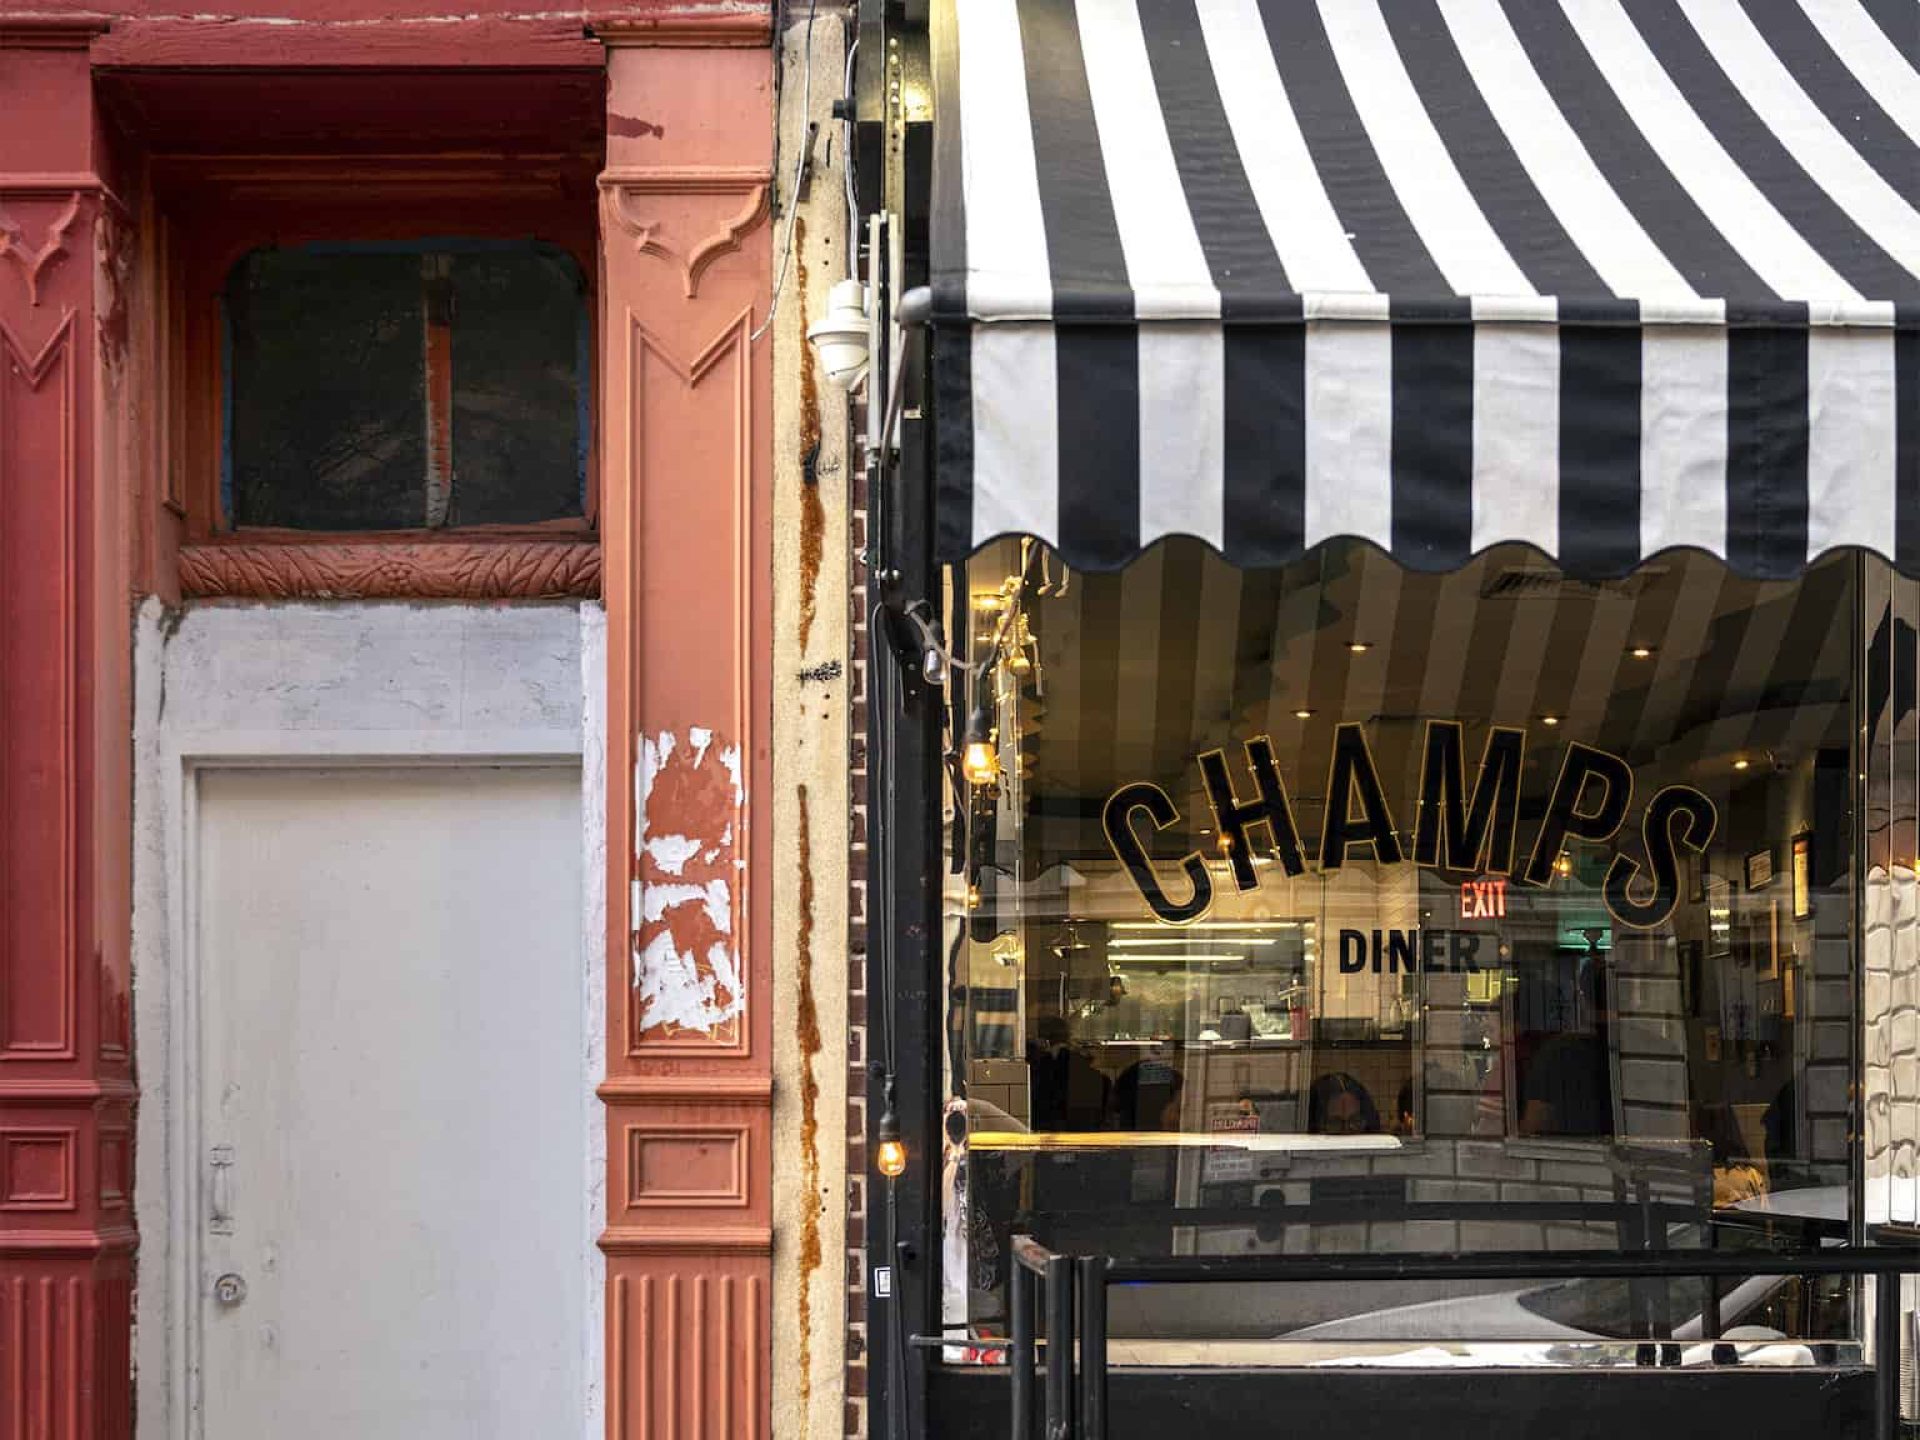 Close up of Champs Diner in the Williamsburg neighborhood. Large window with diner name and striped awning over the entrance.